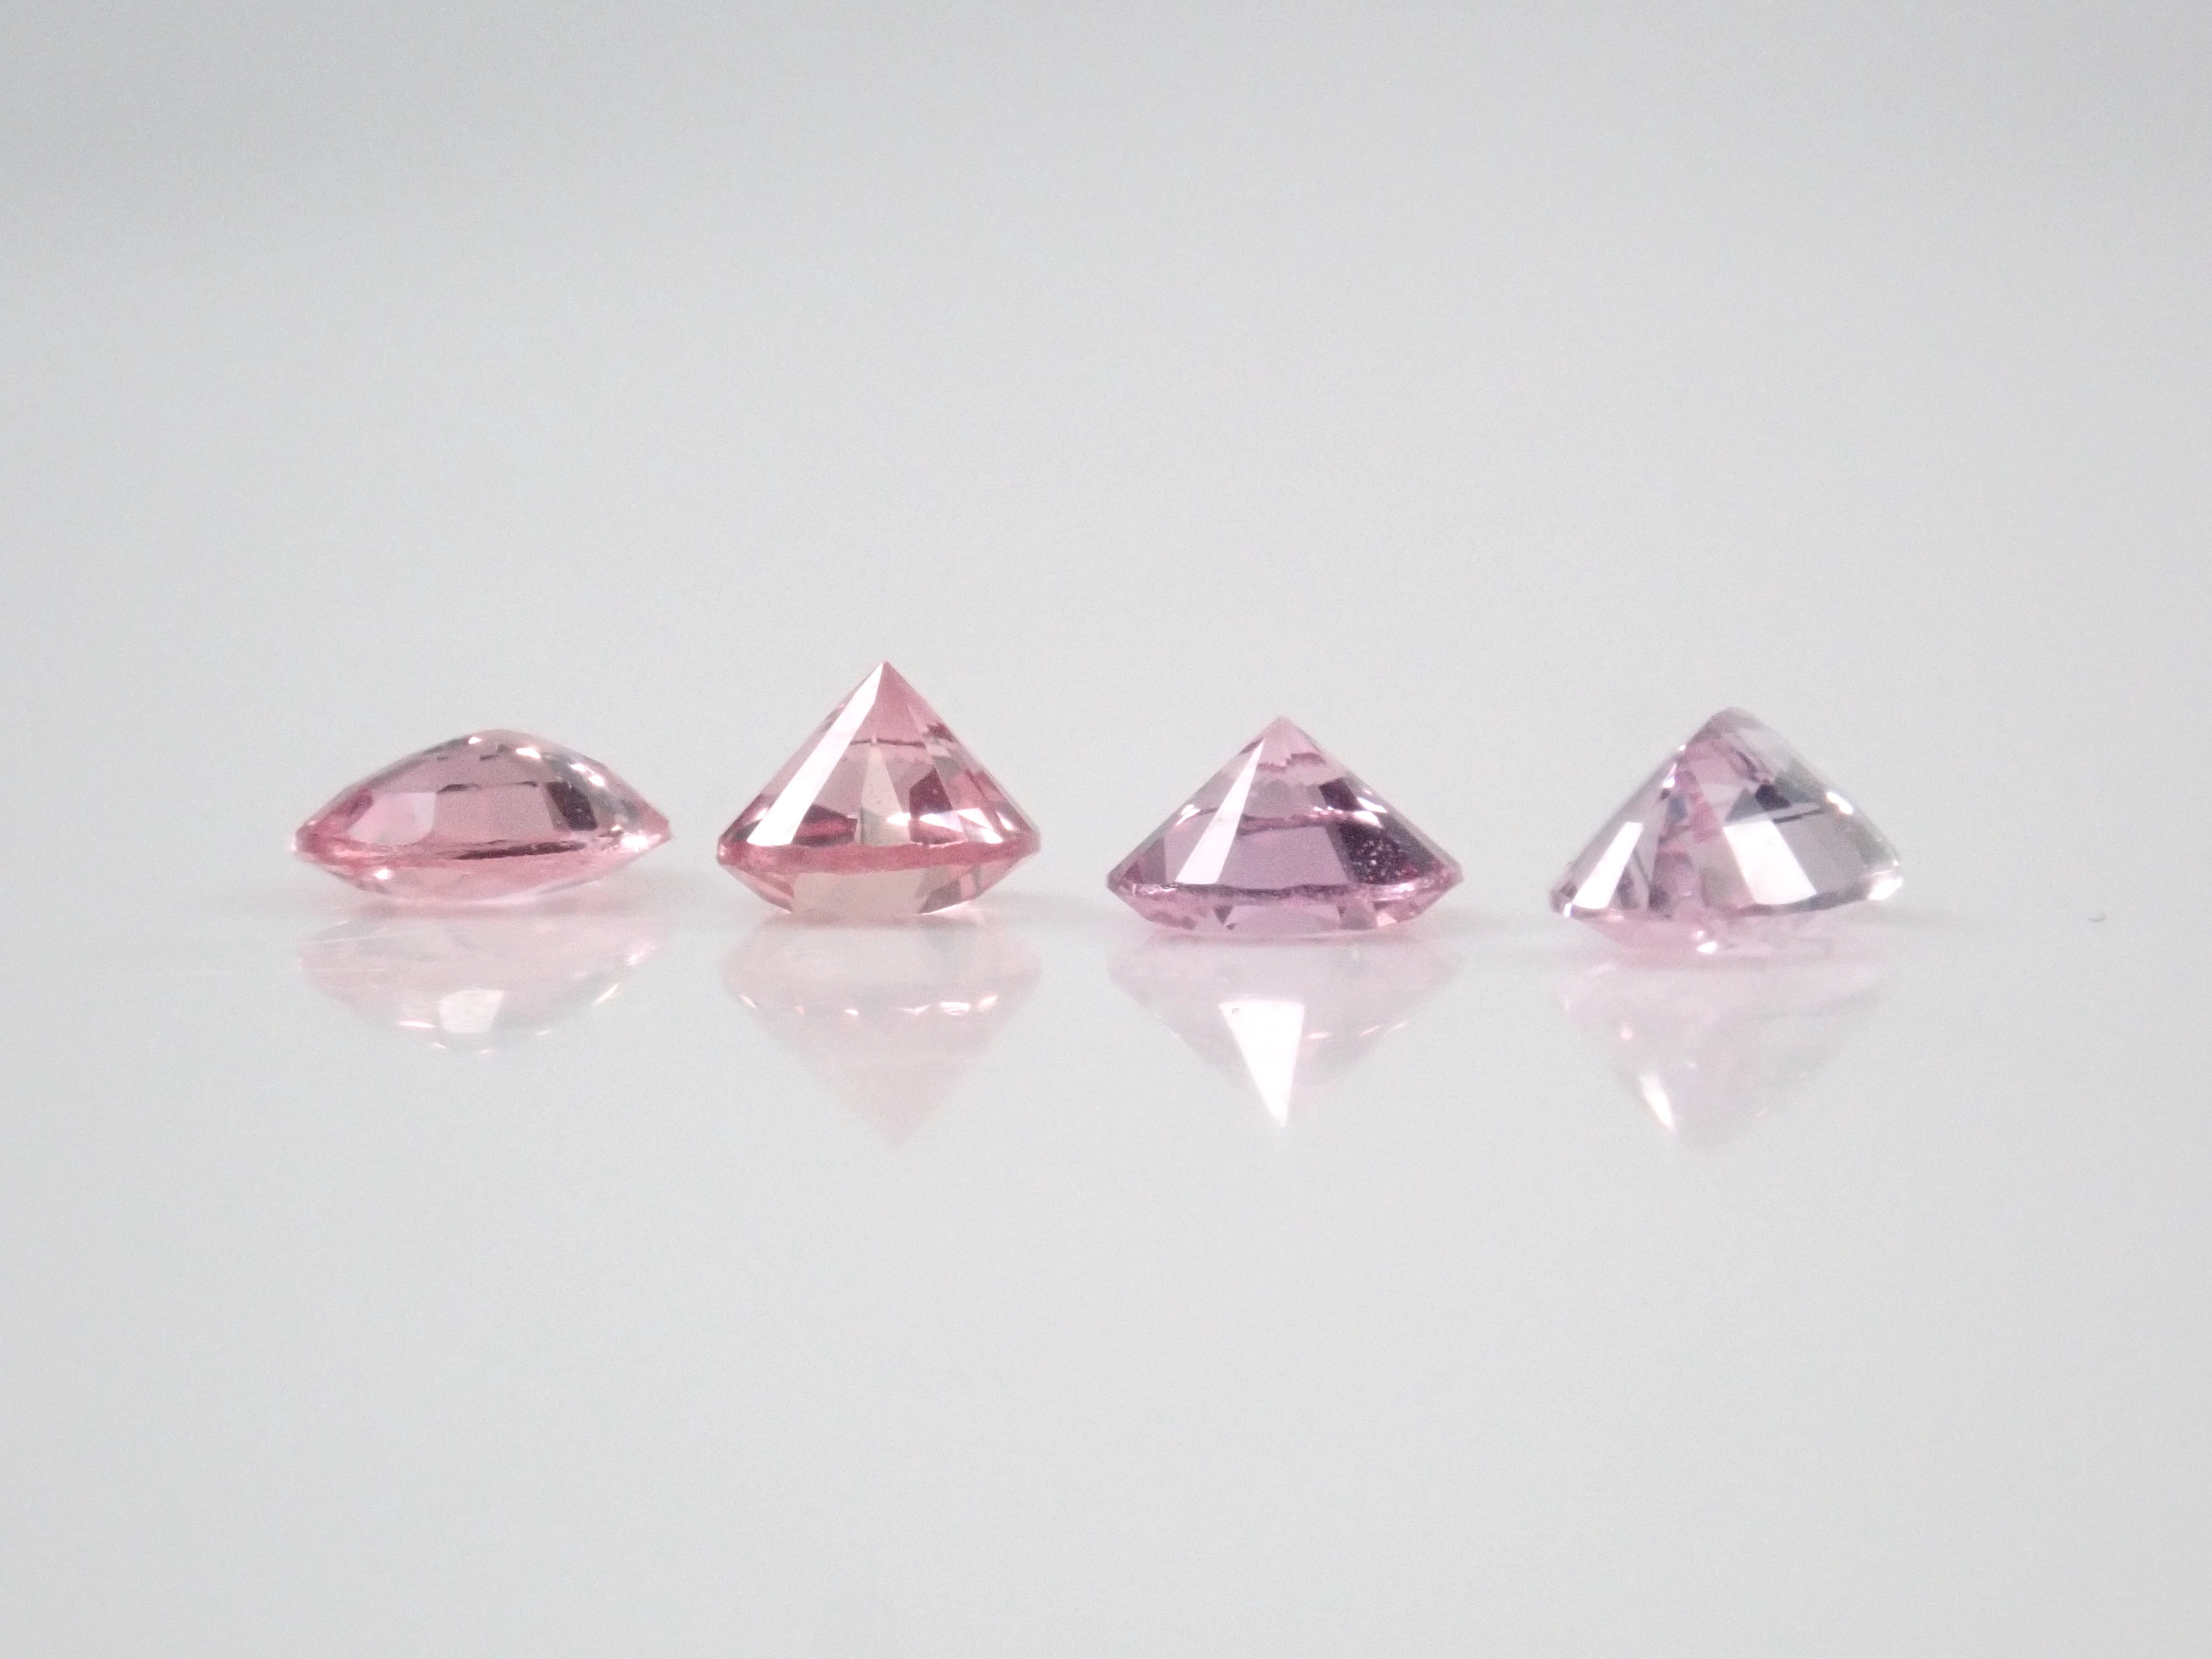 [On sale from 10pm on 8/4] Limited to 4 stones Pink Sapphire Gacha💎 (Only 1 stone is Padparadscha Sapphire 0.215ct with DGL certificate) 1 loose stone [Multiple purchase discounts available]